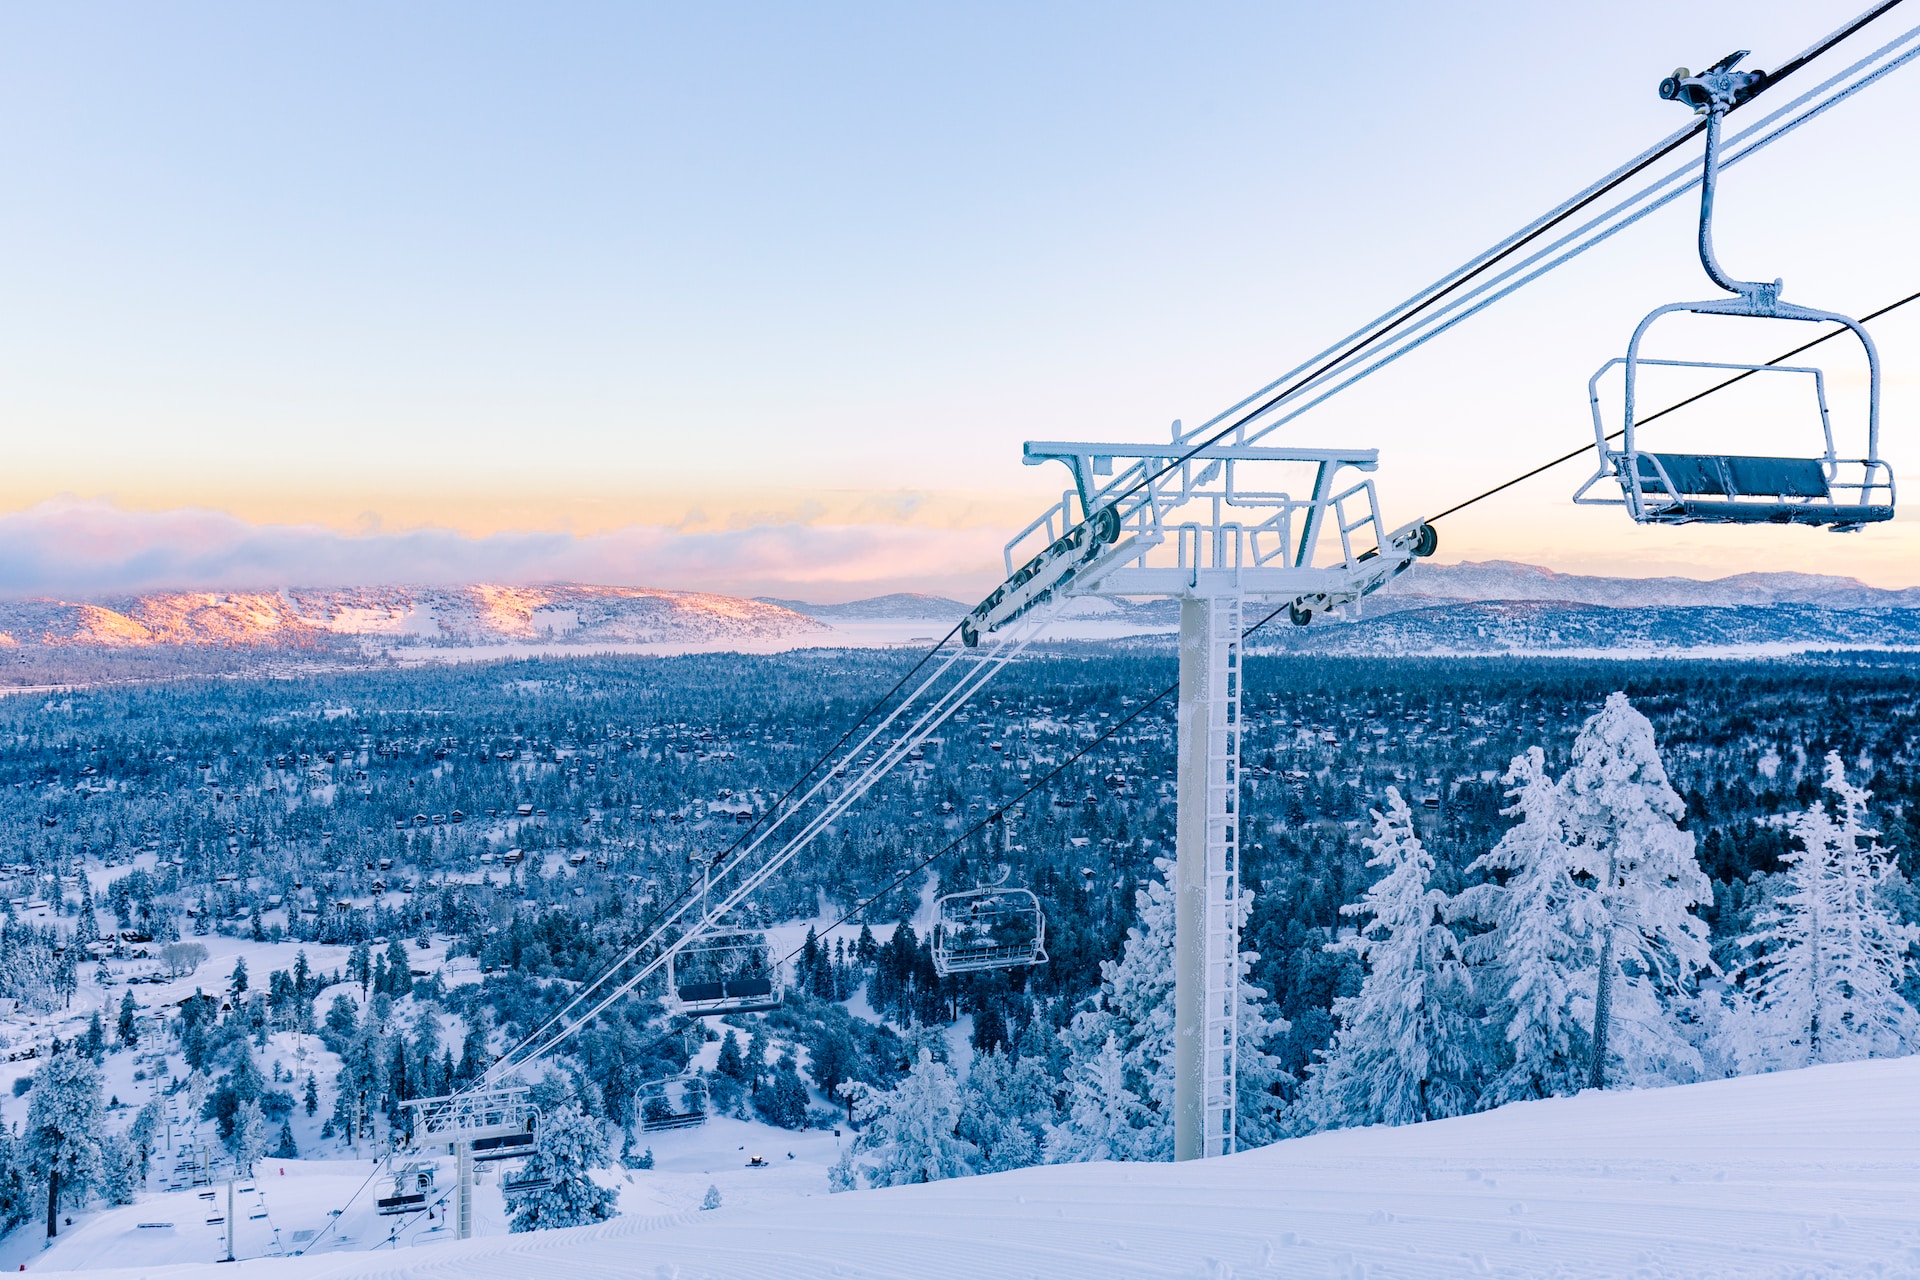 Ski lift over snowy mountain with snowy forest in background.